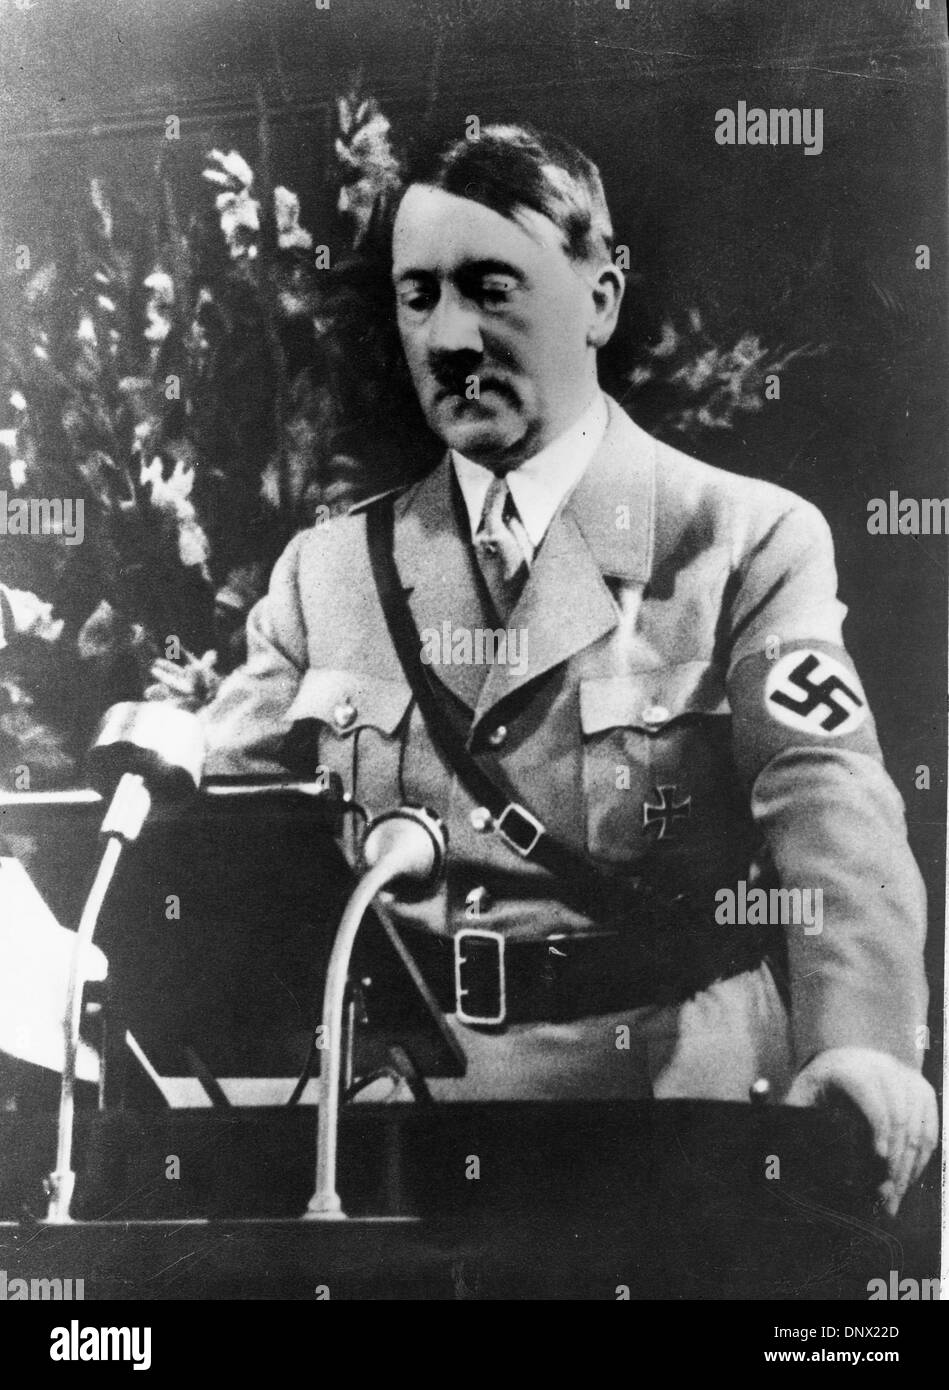 Oct. 24, 1939 - Berlin, Germany - ADOLF HITLER (April 20, 1889ÐApril 30, 1945) was the Fuhrer und Reichskanzler (Leader and Imperial chancellor) of Germany from 1933 to his death. He was leader of the National Socialist German Workers Party (NSDAP), better known as the Nazi Party. The racial policies that Hitler directed culminated in a massive number of deaths commonly cited at ov Stock Photo